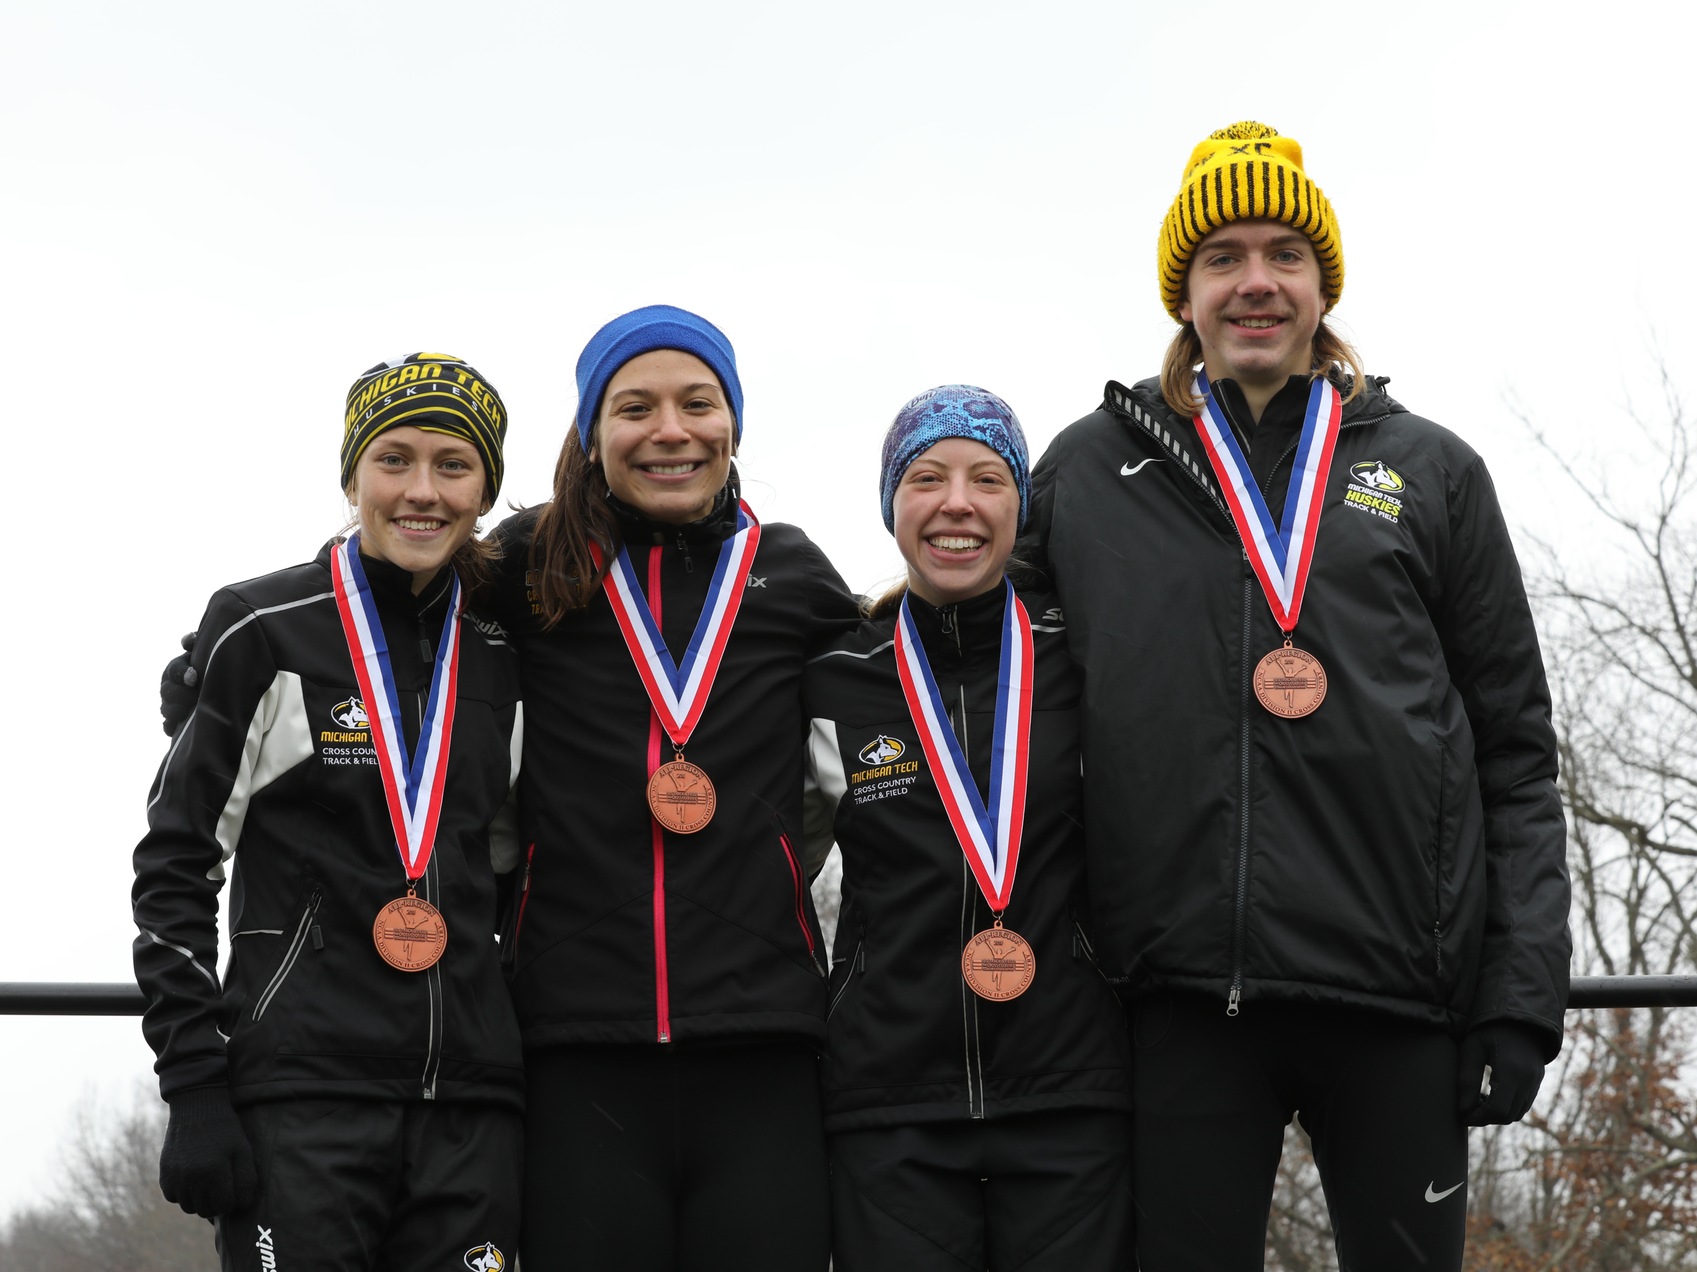 Four Runners Earn All-Region as Michigan Tech Women Qualify for National Championships